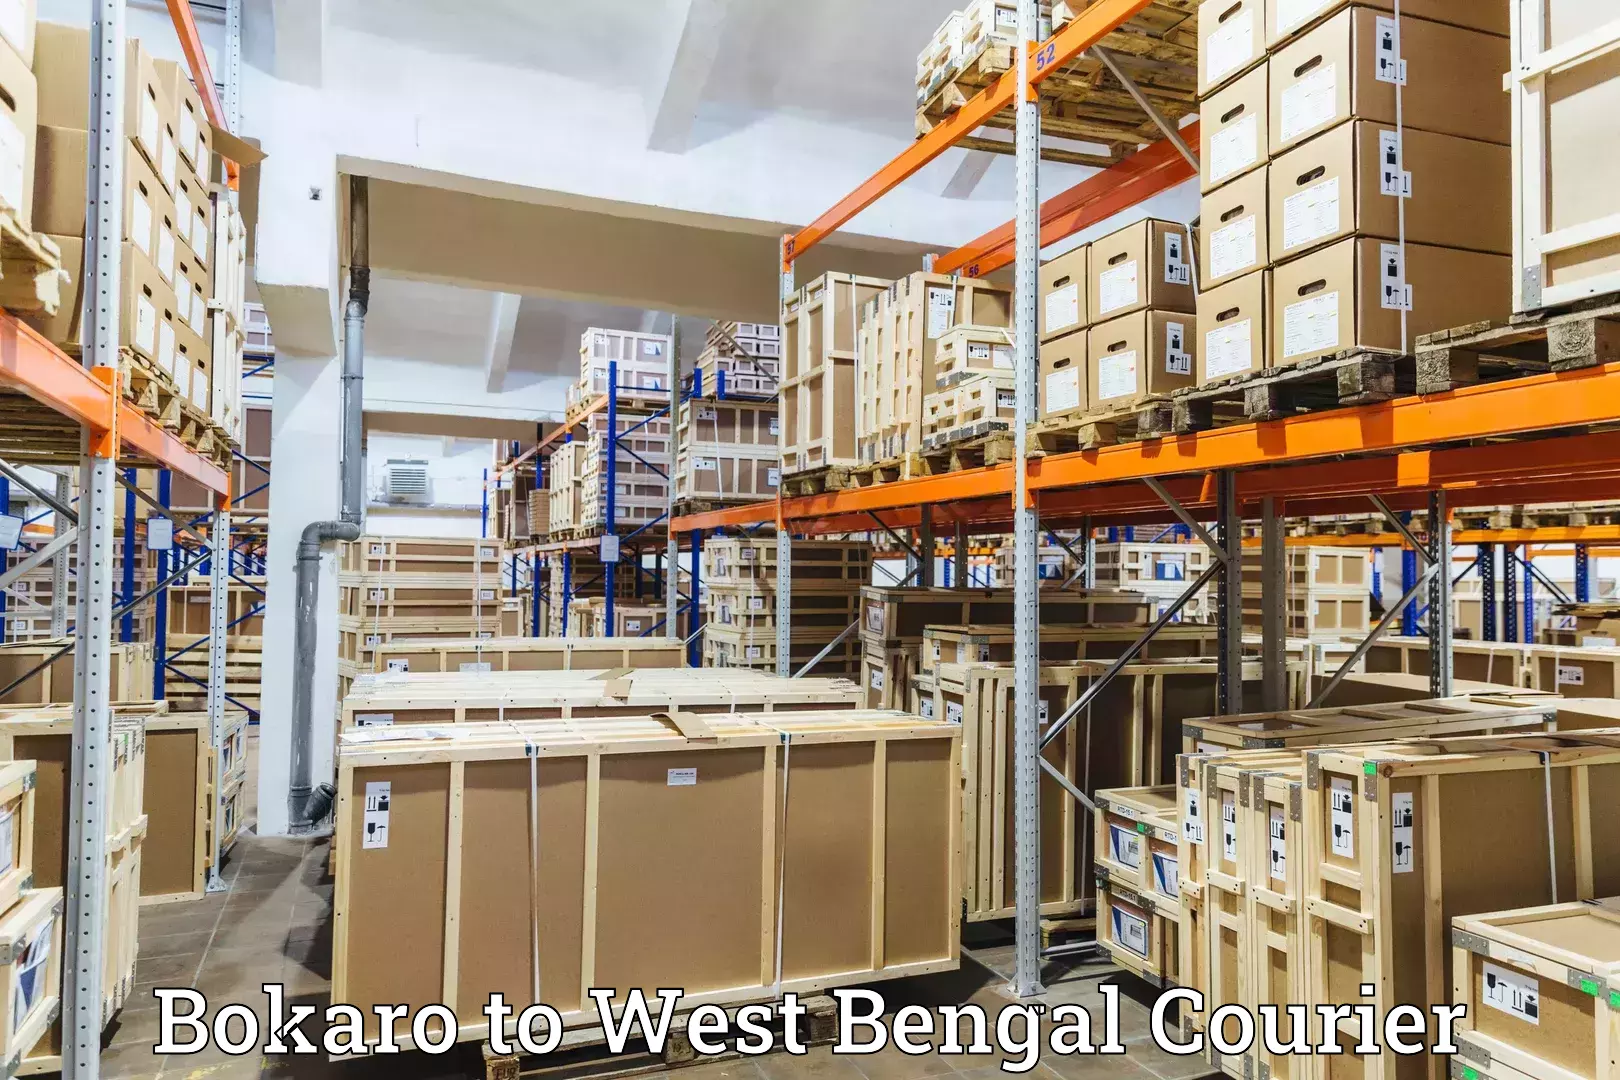 Reliable courier service in Bokaro to Barasat